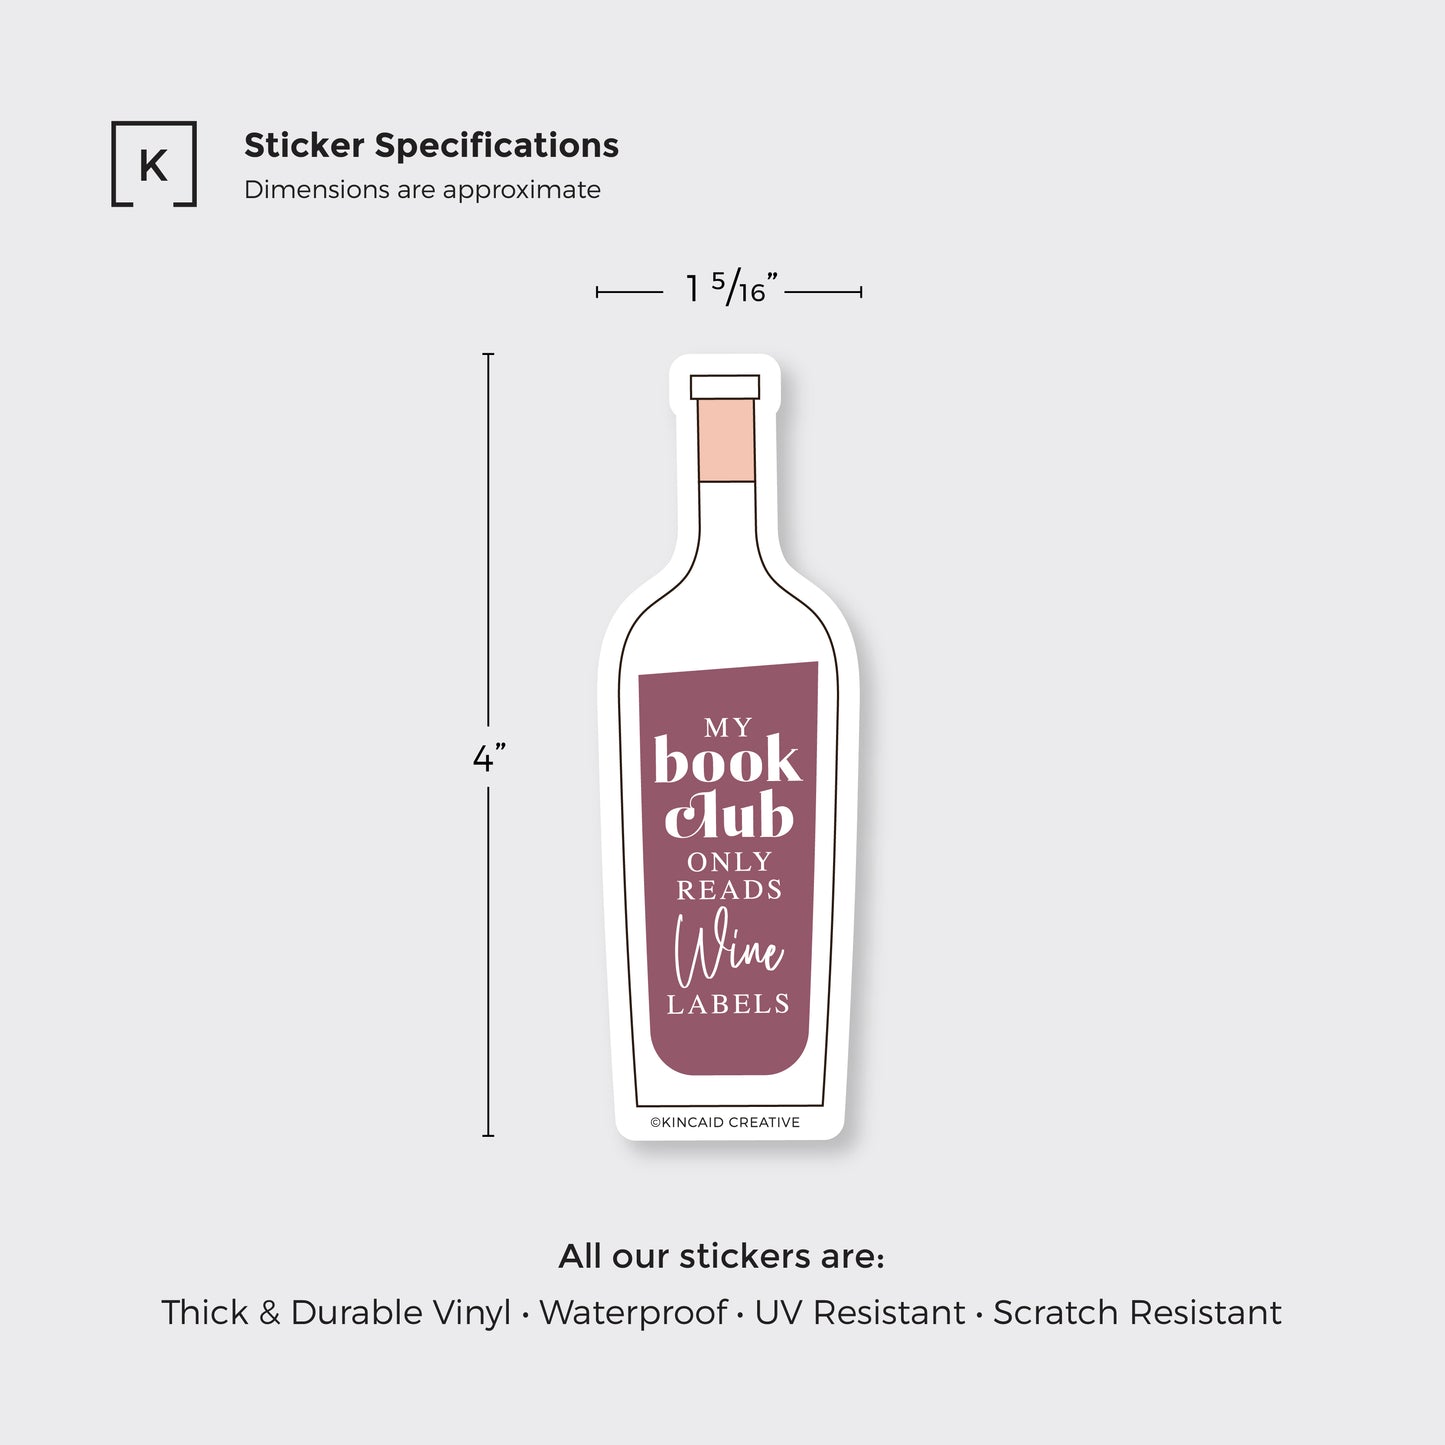 Waterproof Vinyl Sticker, My book club only reads wine labels, wine book club, Dimensions 4x1.3125, thick durable vinyl, waterproof, UV and scratch resistant, Kincaid Creative